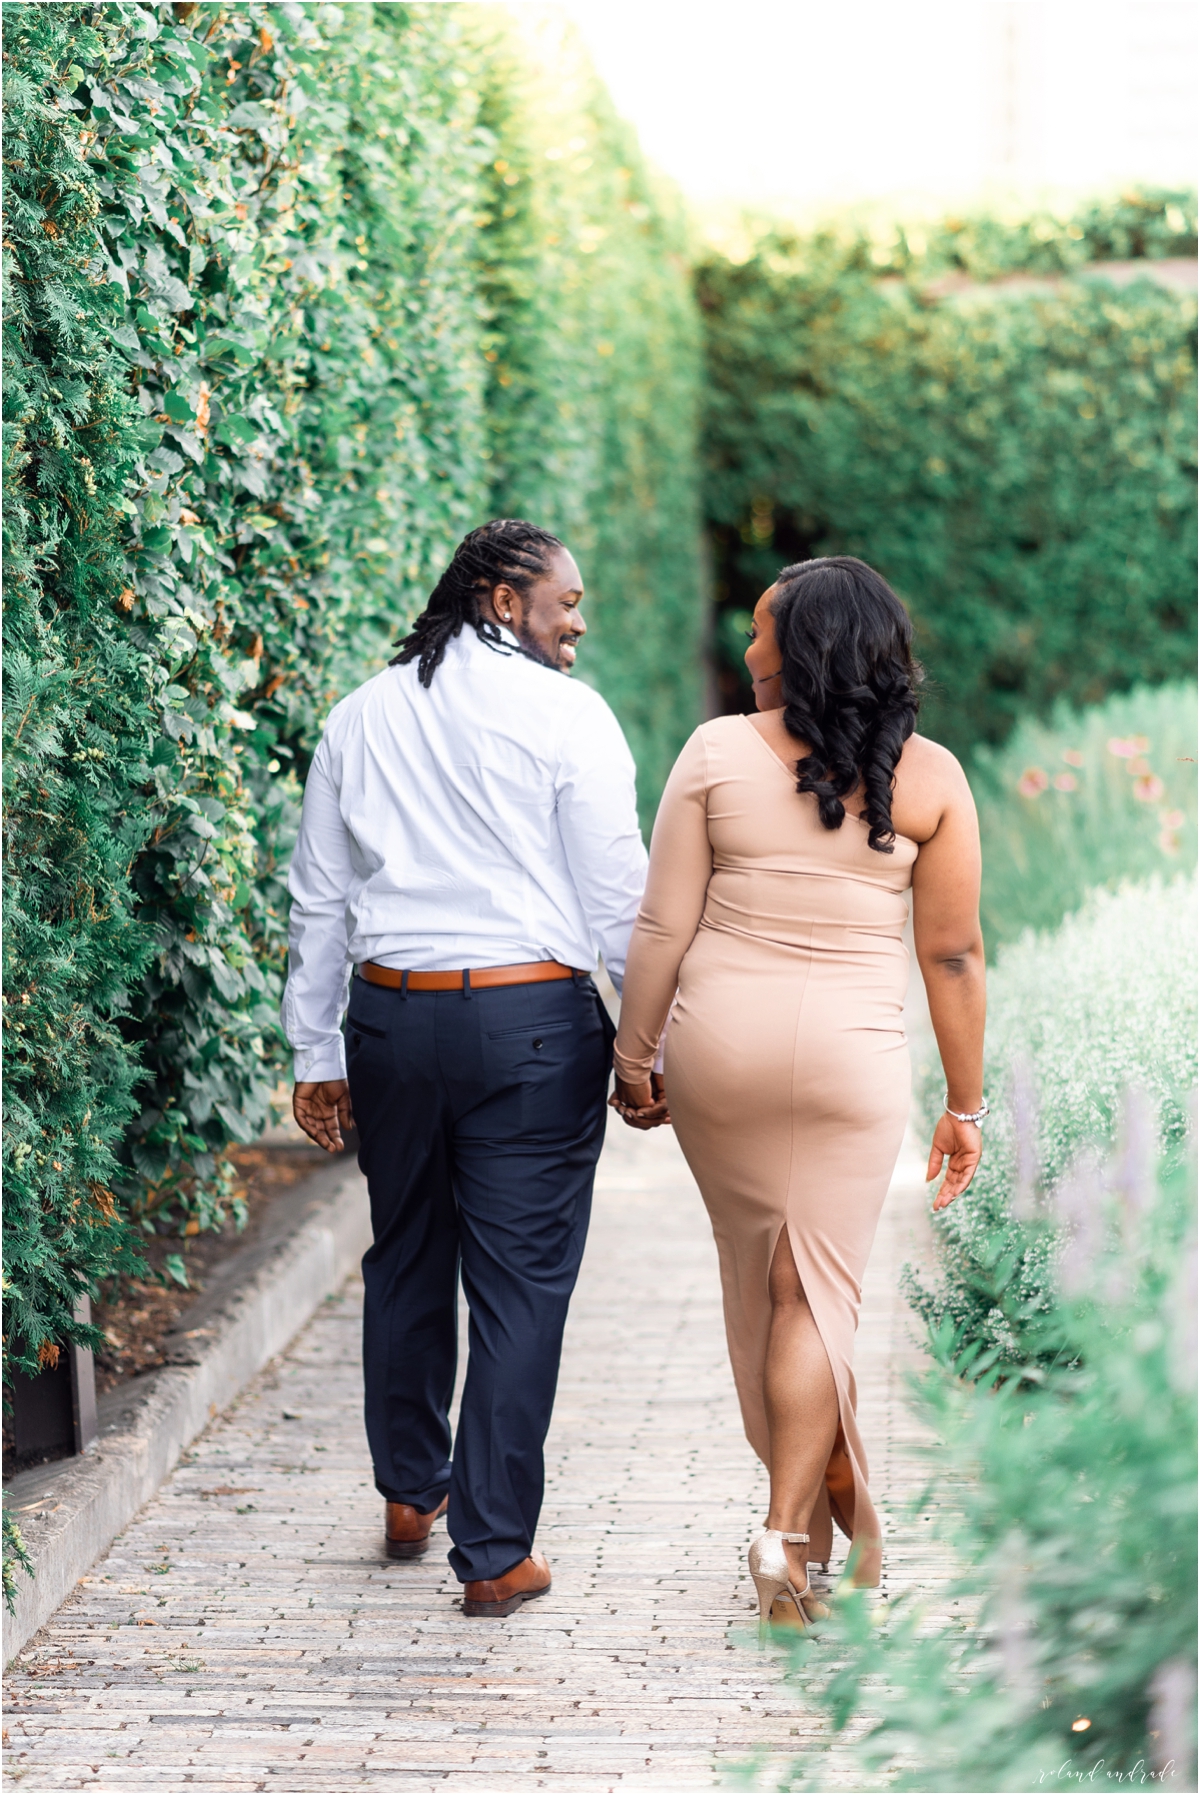 Lurie Garden Engagement Session Chicago IL6.jpg